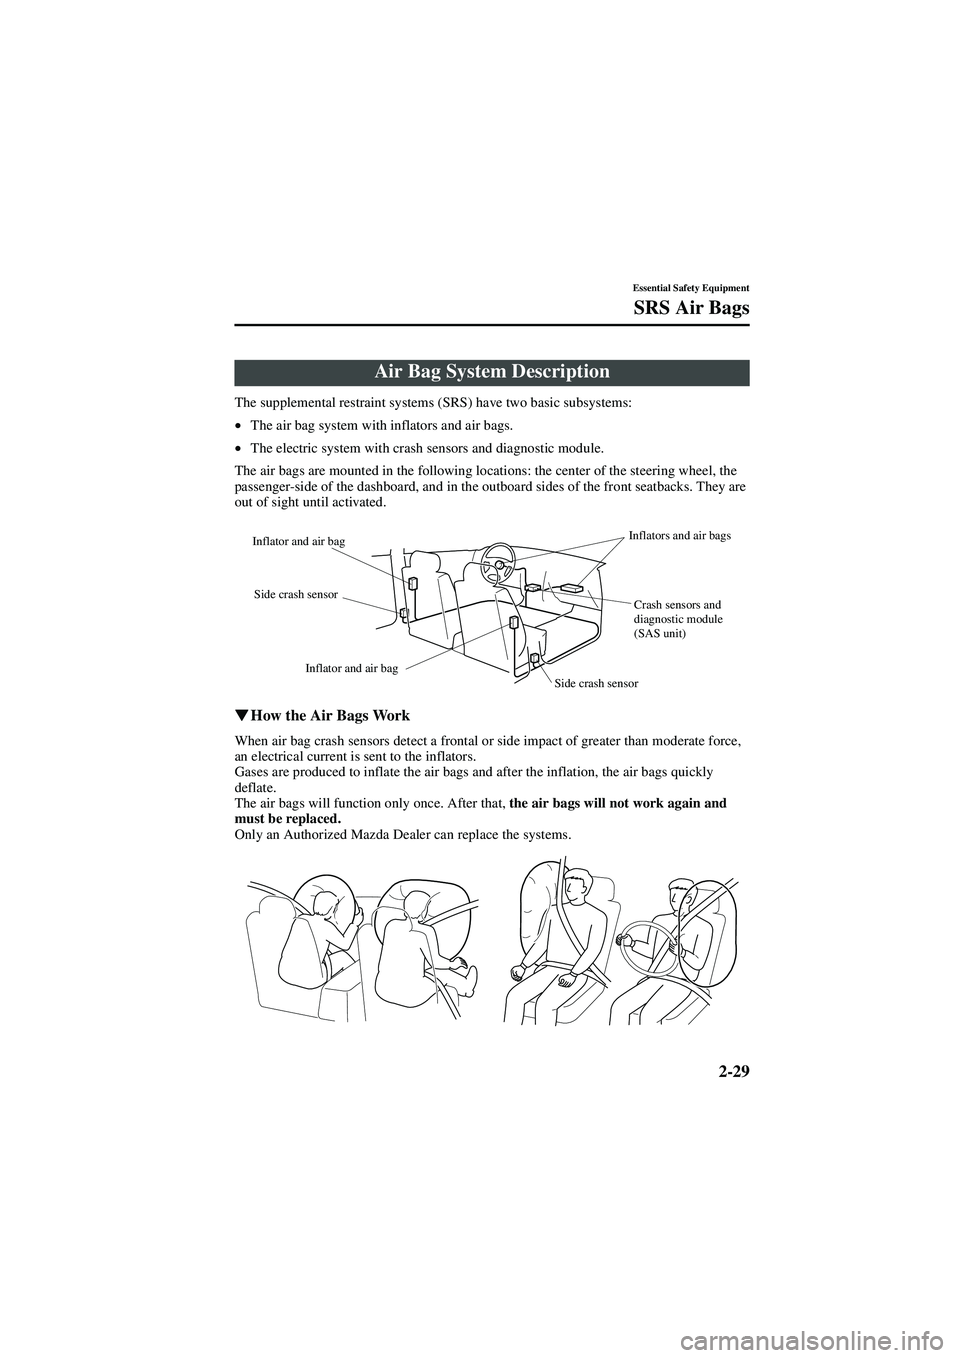 MAZDA MODEL 626 2002 Owners Guide 2-29
Essential Safety Equipment
SRS Air Bags
Form No. 8Q50-EA-01G
The supplemental restraint systems (SRS) have two basic subsystems:
•The air bag system with inflators and air bags.
• The electri